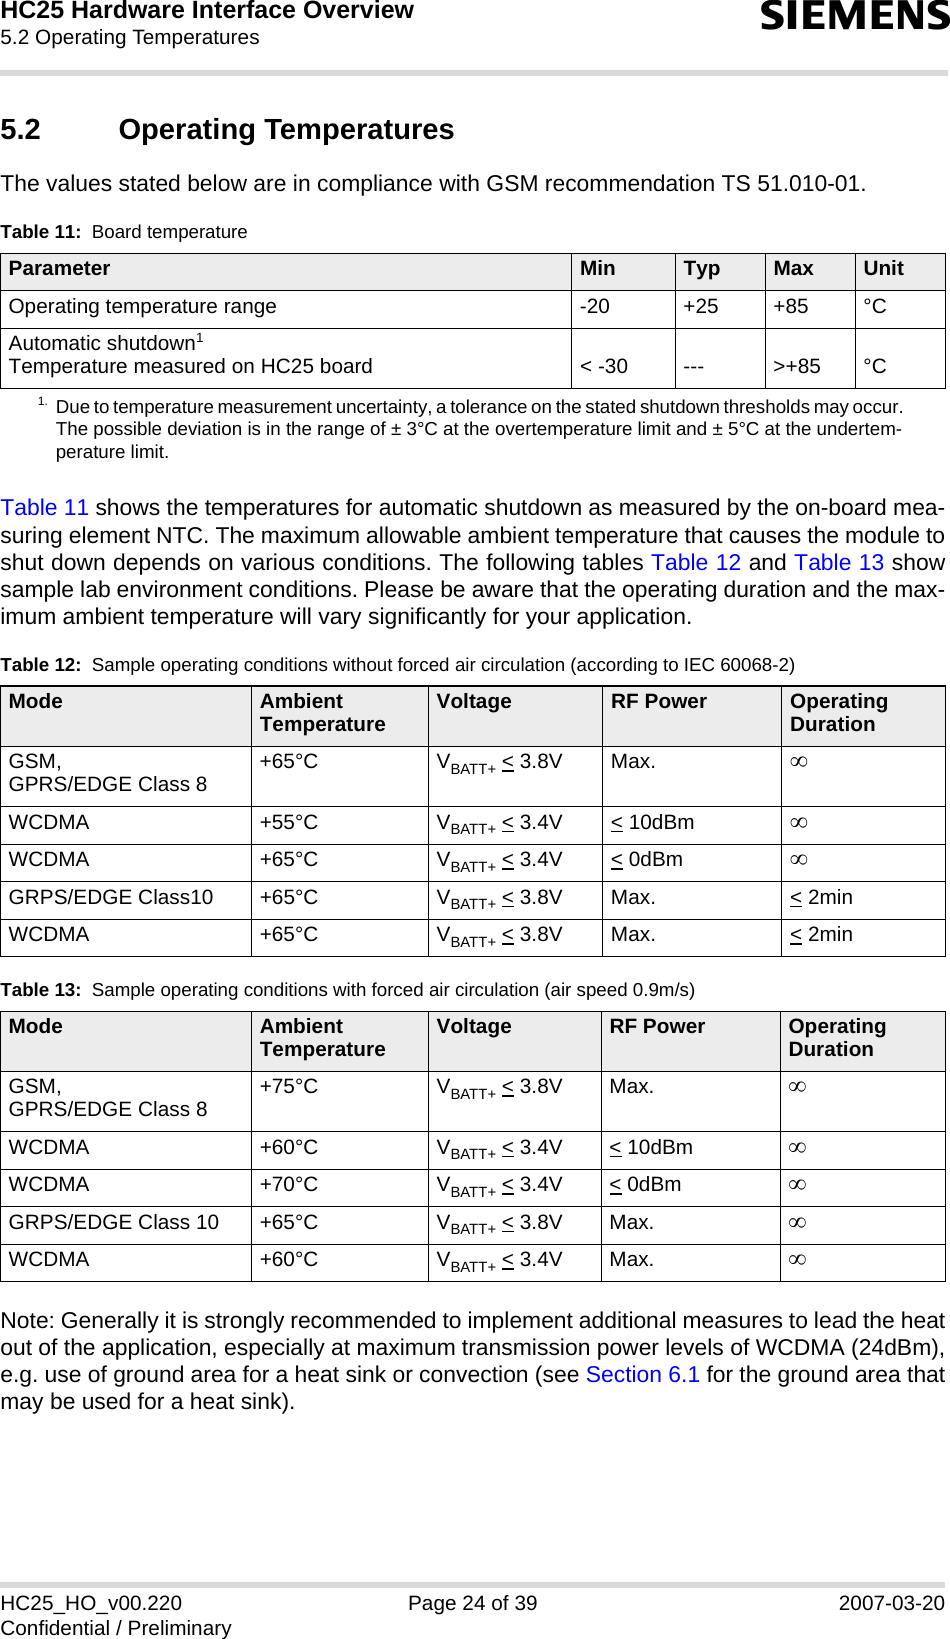 HC25 Hardware Interface Overview5.2 Operating Temperatures26sHC25_HO_v00.220 Page 24 of 39 2007-03-20Confidential / Preliminary5.2 Operating TemperaturesThe values stated below are in compliance with GSM recommendation TS 51.010-01.Table 11 shows the temperatures for automatic shutdown as measured by the on-board mea-suring element NTC. The maximum allowable ambient temperature that causes the module toshut down depends on various conditions. The following tables Table 12 and Table 13 showsample lab environment conditions. Please be aware that the operating duration and the max-imum ambient temperature will vary significantly for your application.Note: Generally it is strongly recommended to implement additional measures to lead the heatout of the application, especially at maximum transmission power levels of WCDMA (24dBm),e.g. use of ground area for a heat sink or convection (see Section 6.1 for the ground area thatmay be used for a heat sink).Table 11:  Board temperatureParameter Min Typ Max UnitOperating temperature range -20 +25 +85 °CAutomatic shutdown1Temperature measured on HC25 board1. Due to temperature measurement uncertainty, a tolerance on the stated shutdown thresholds may occur. The possible deviation is in the range of ± 3°C at the overtemperature limit and ± 5°C at the undertem-perature limit.&lt; -30 --- &gt;+85 °CTable 12:  Sample operating conditions without forced air circulation (according to IEC 60068-2)Mode Ambient Temperature Voltage RF Power Operating DurationGSM,GPRS/EDGE Class 8 +65°C VBATT+ &lt; 3.8V Max. ∞WCDMA +55°C VBATT+ &lt; 3.4V &lt; 10dBm ∞WCDMA +65°C VBATT+ &lt; 3.4V &lt; 0dBm ∞GRPS/EDGE Class10 +65°C VBATT+ &lt; 3.8V Max. &lt; 2minWCDMA +65°C VBATT+ &lt; 3.8V Max. &lt; 2minTable 13:  Sample operating conditions with forced air circulation (air speed 0.9m/s)Mode AmbientTemperature Voltage RF Power Operating DurationGSM,GPRS/EDGE Class 8 +75°C VBATT+ &lt; 3.8V Max. ∞WCDMA +60°C VBATT+ &lt; 3.4V &lt; 10dBm ∞WCDMA +70°C VBATT+ &lt; 3.4V &lt; 0dBm ∞GRPS/EDGE Class 10 +65°C VBATT+ &lt; 3.8V Max. ∞WCDMA +60°C VBATT+ &lt; 3.4V Max. ∞